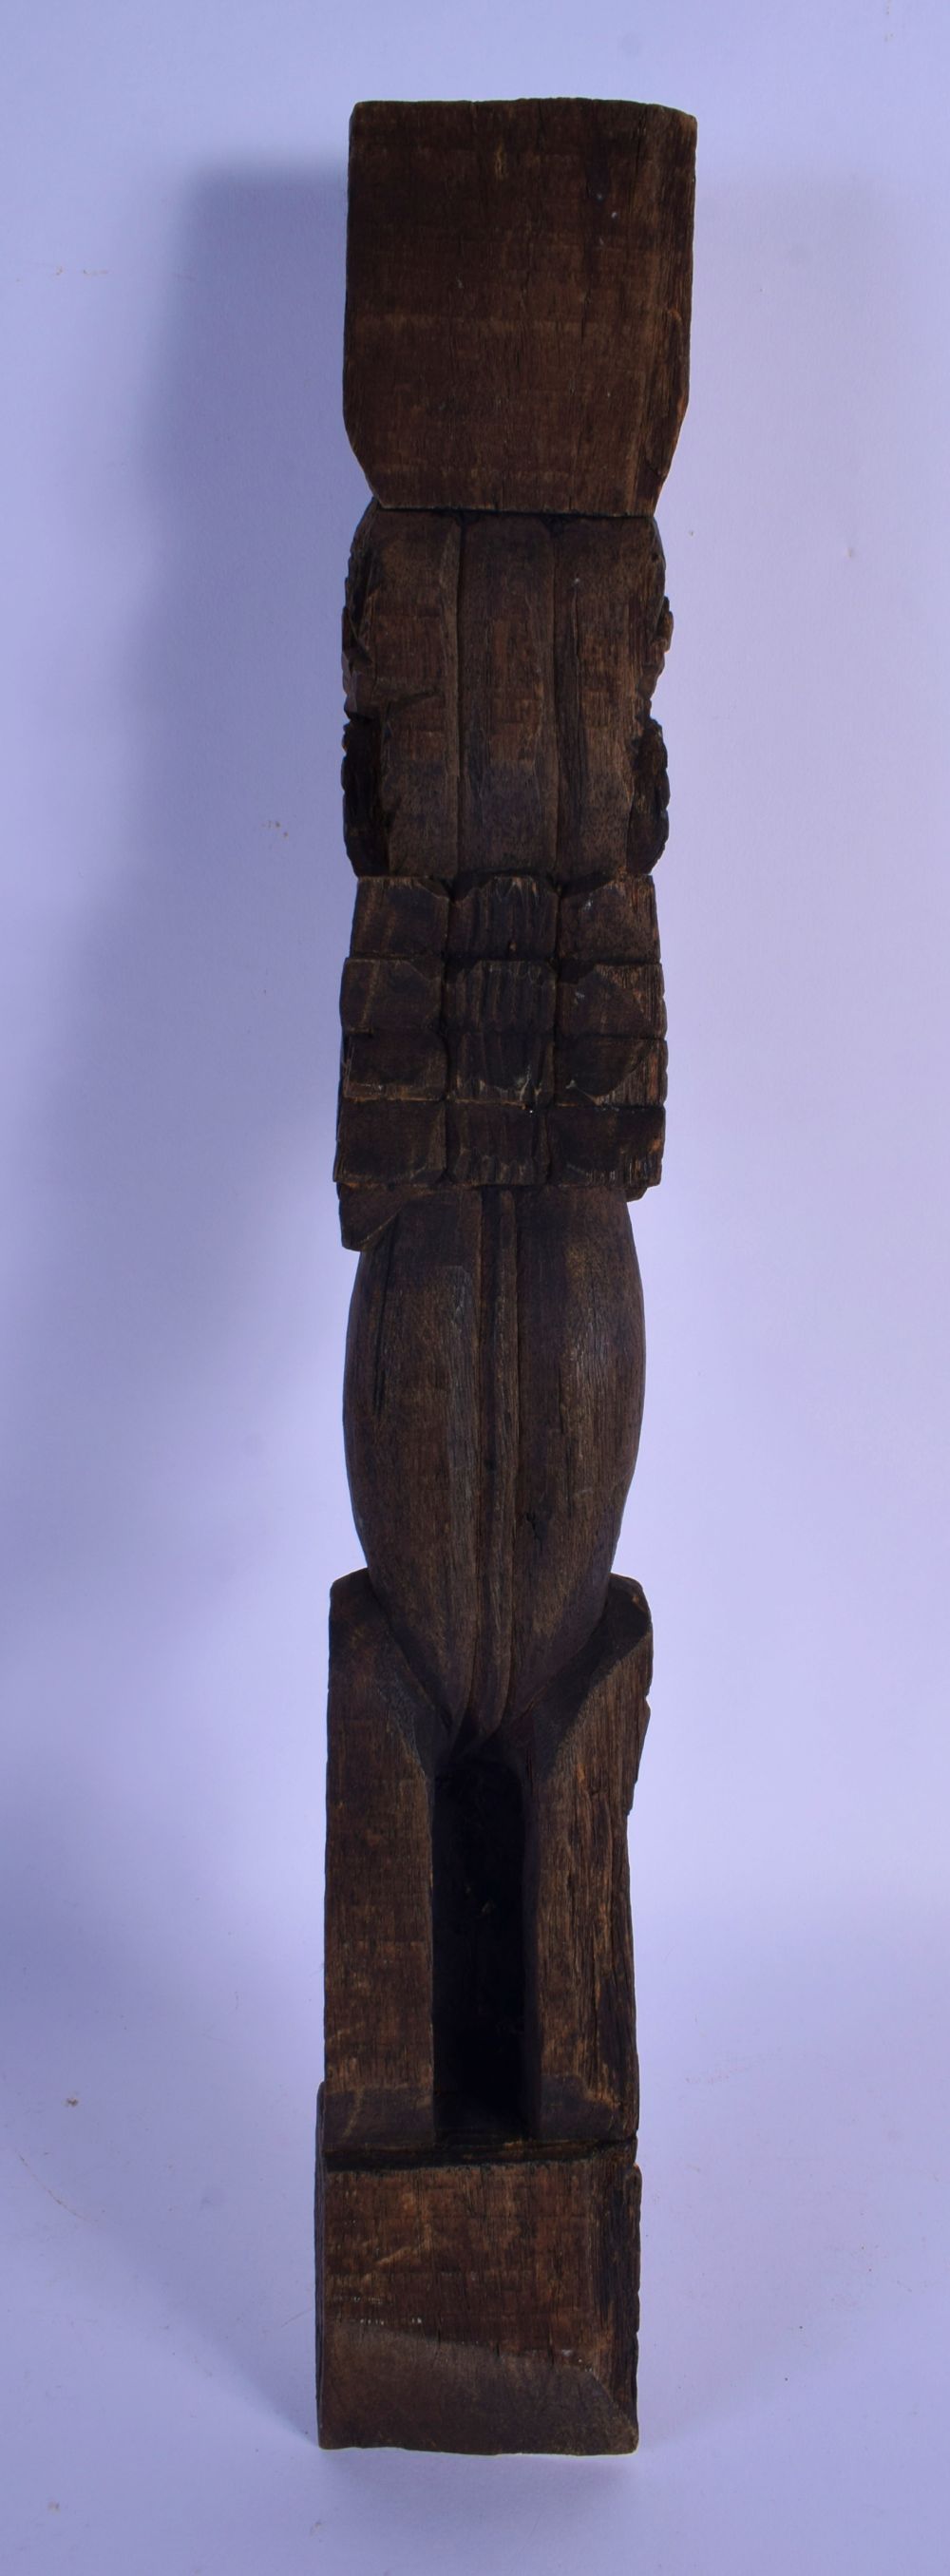 AN UNUSUAL TRIBAL CARVED WOOD POST FINIAL formed as a scowling beast. 42 cm x 8 cm. - Image 5 of 5